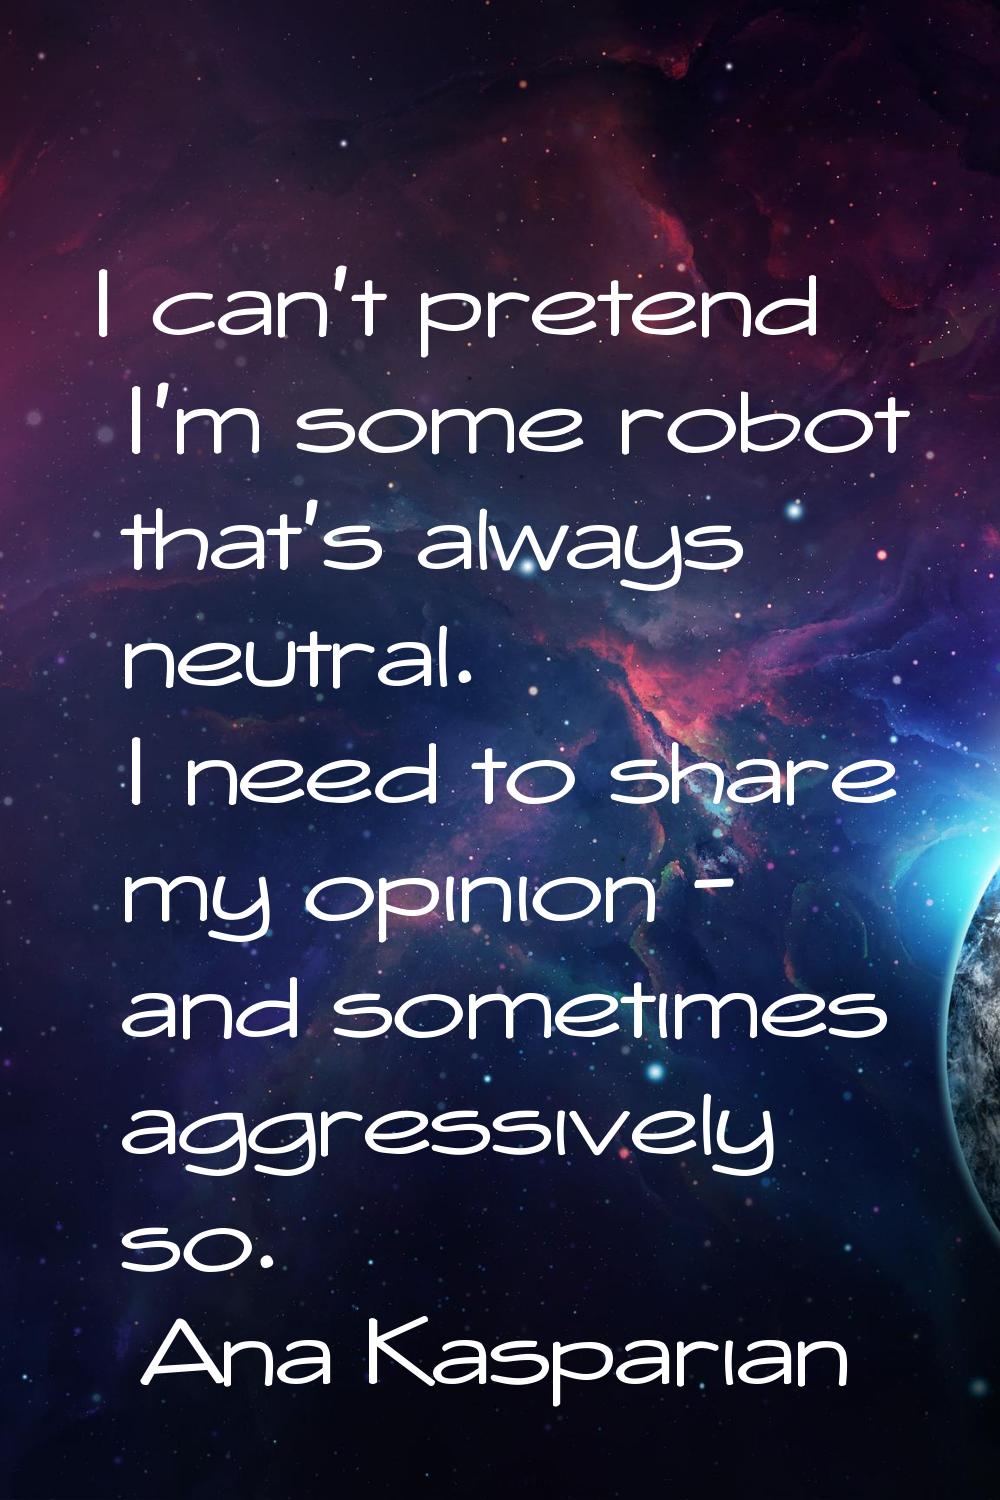 I can't pretend I'm some robot that's always neutral. I need to share my opinion - and sometimes ag